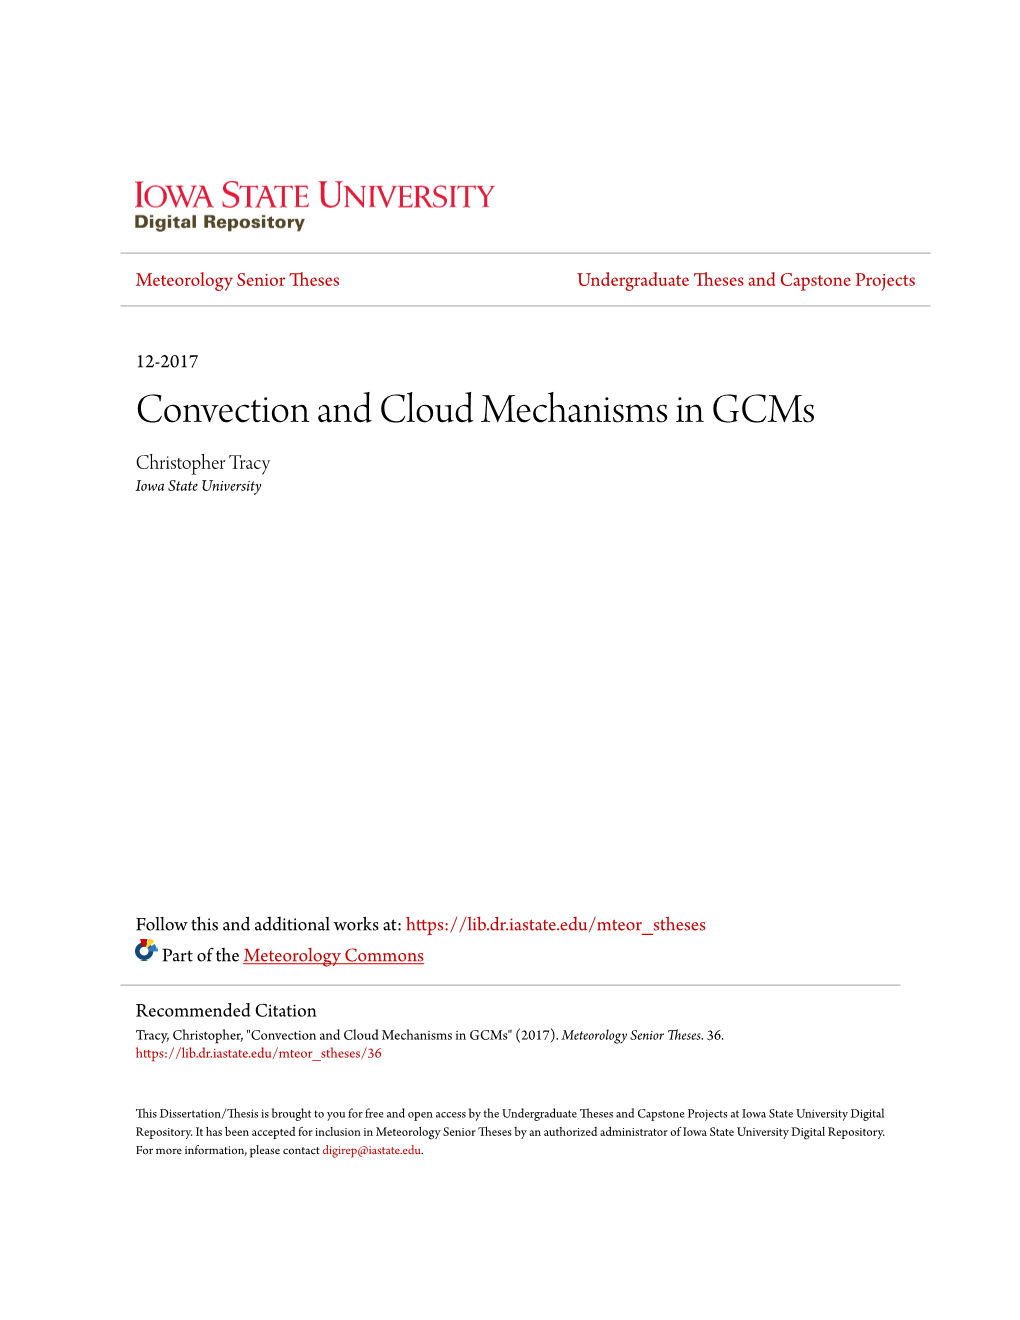 Convection and Cloud Mechanisms in Gcms Christopher Tracy Iowa State University